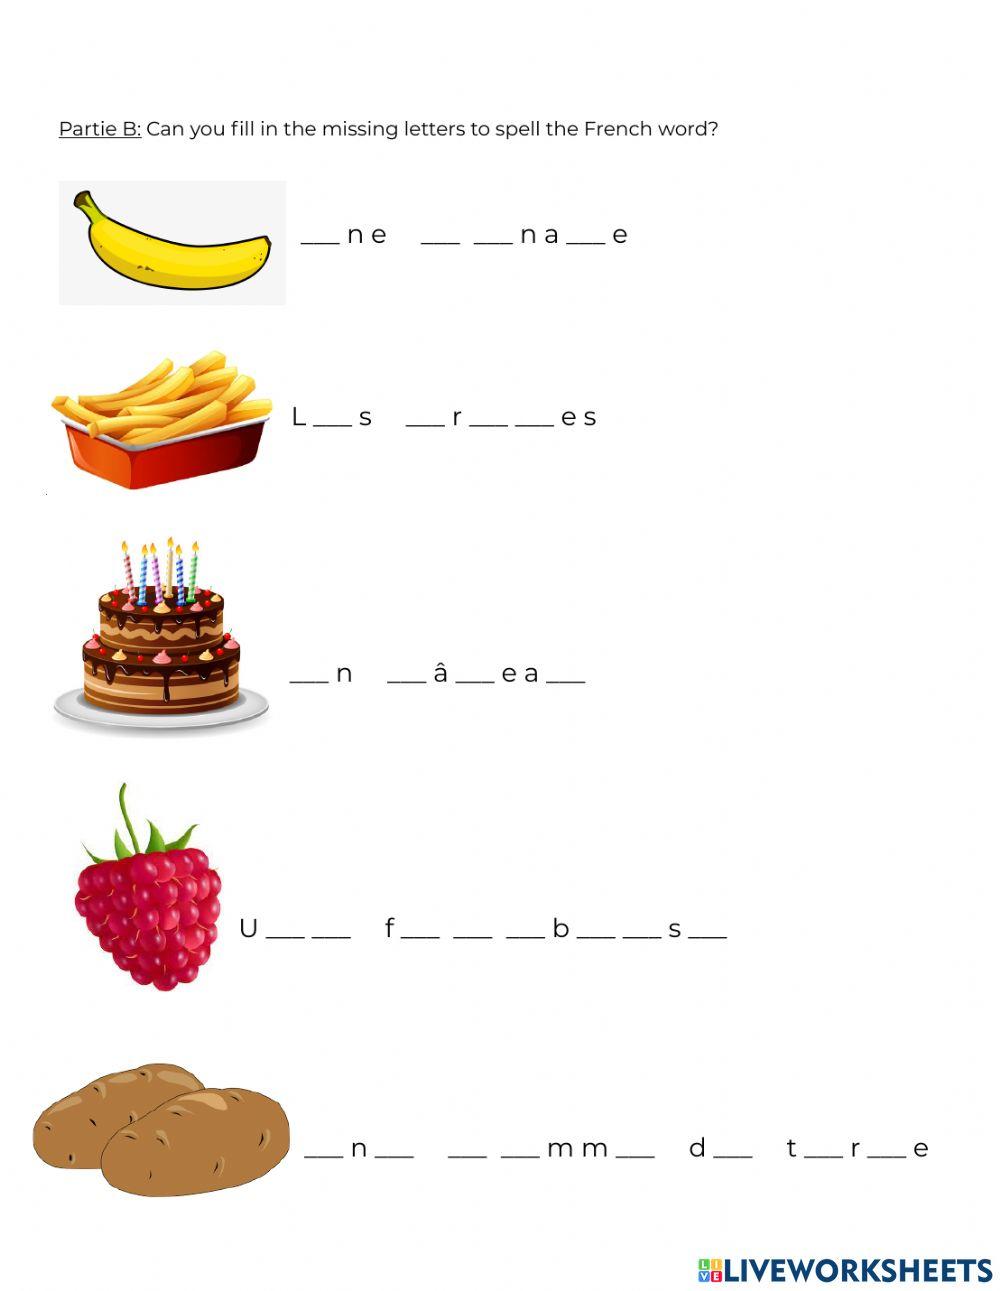 Food Vocabulary Matching and Spelling (LL)